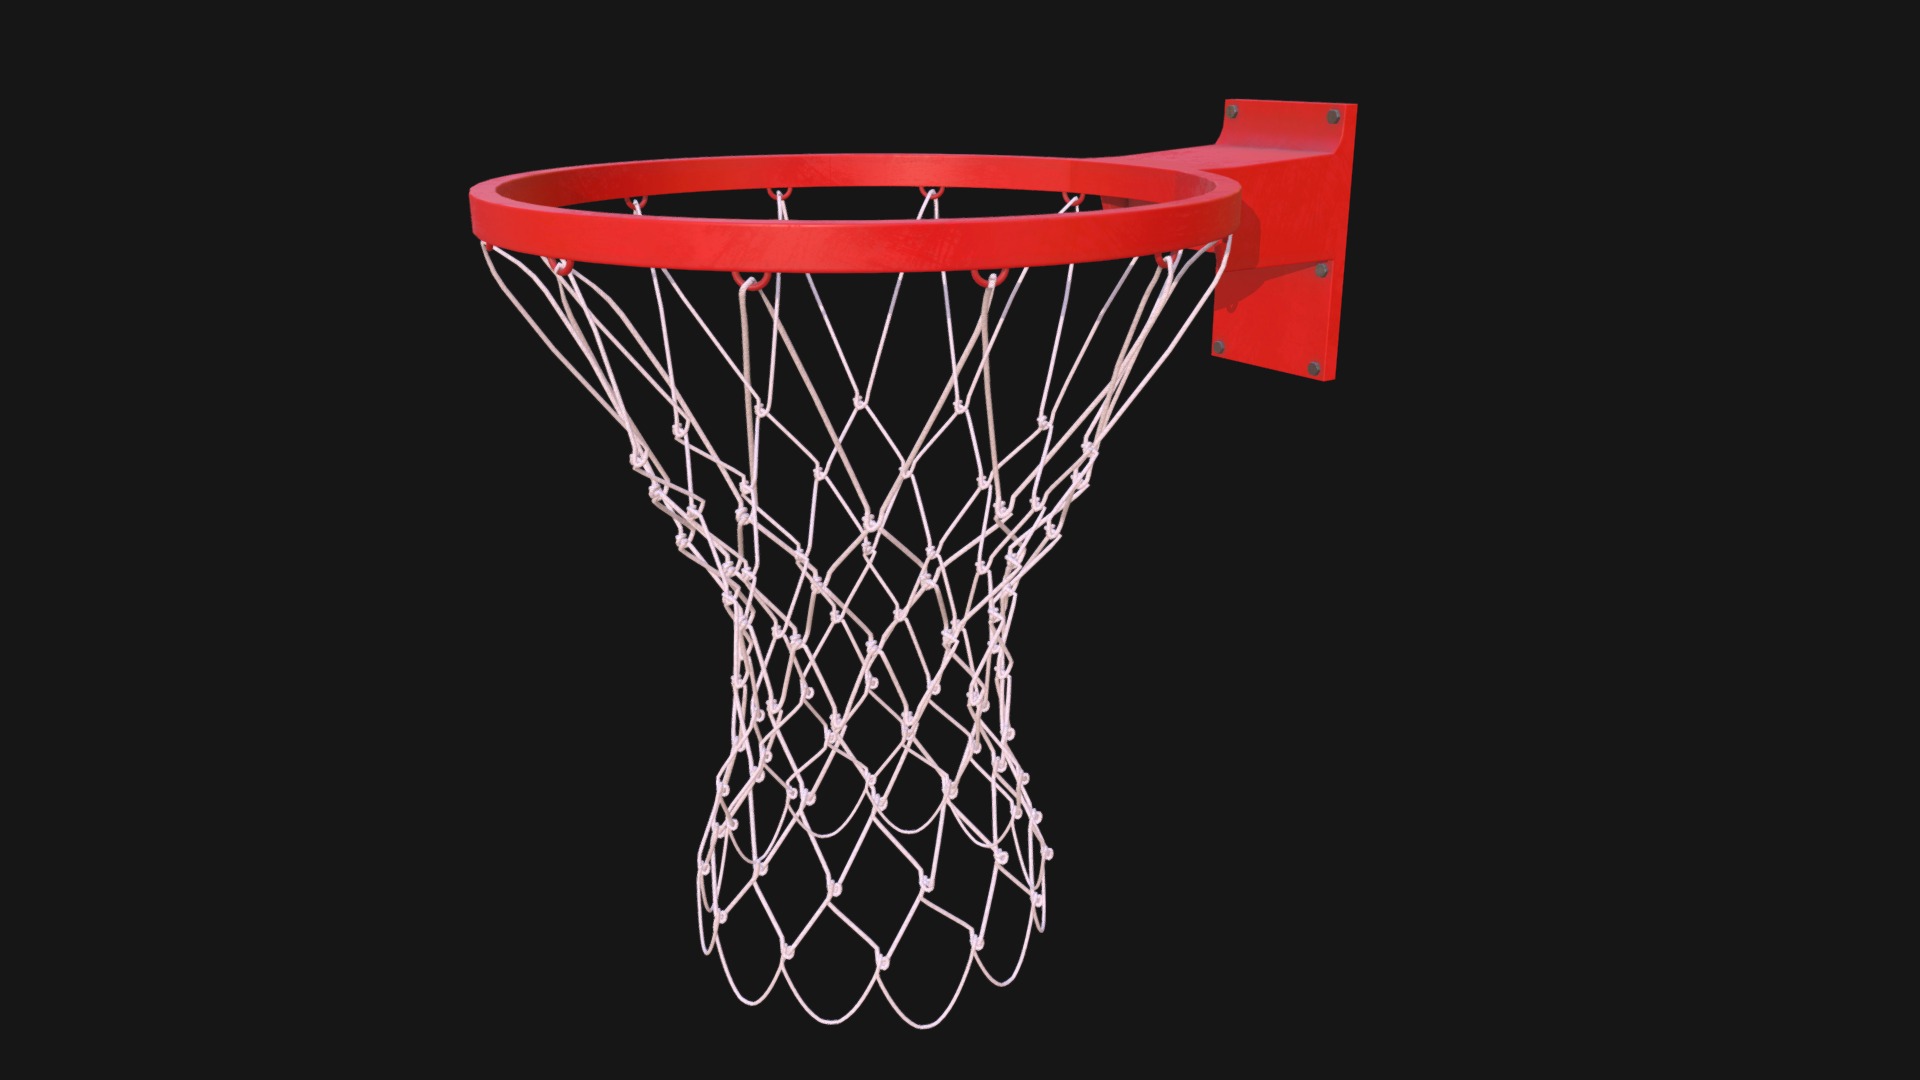 3D model Basket ring - This is a 3D model of the Basket ring. The 3D model is about a basketball hoop with a net.